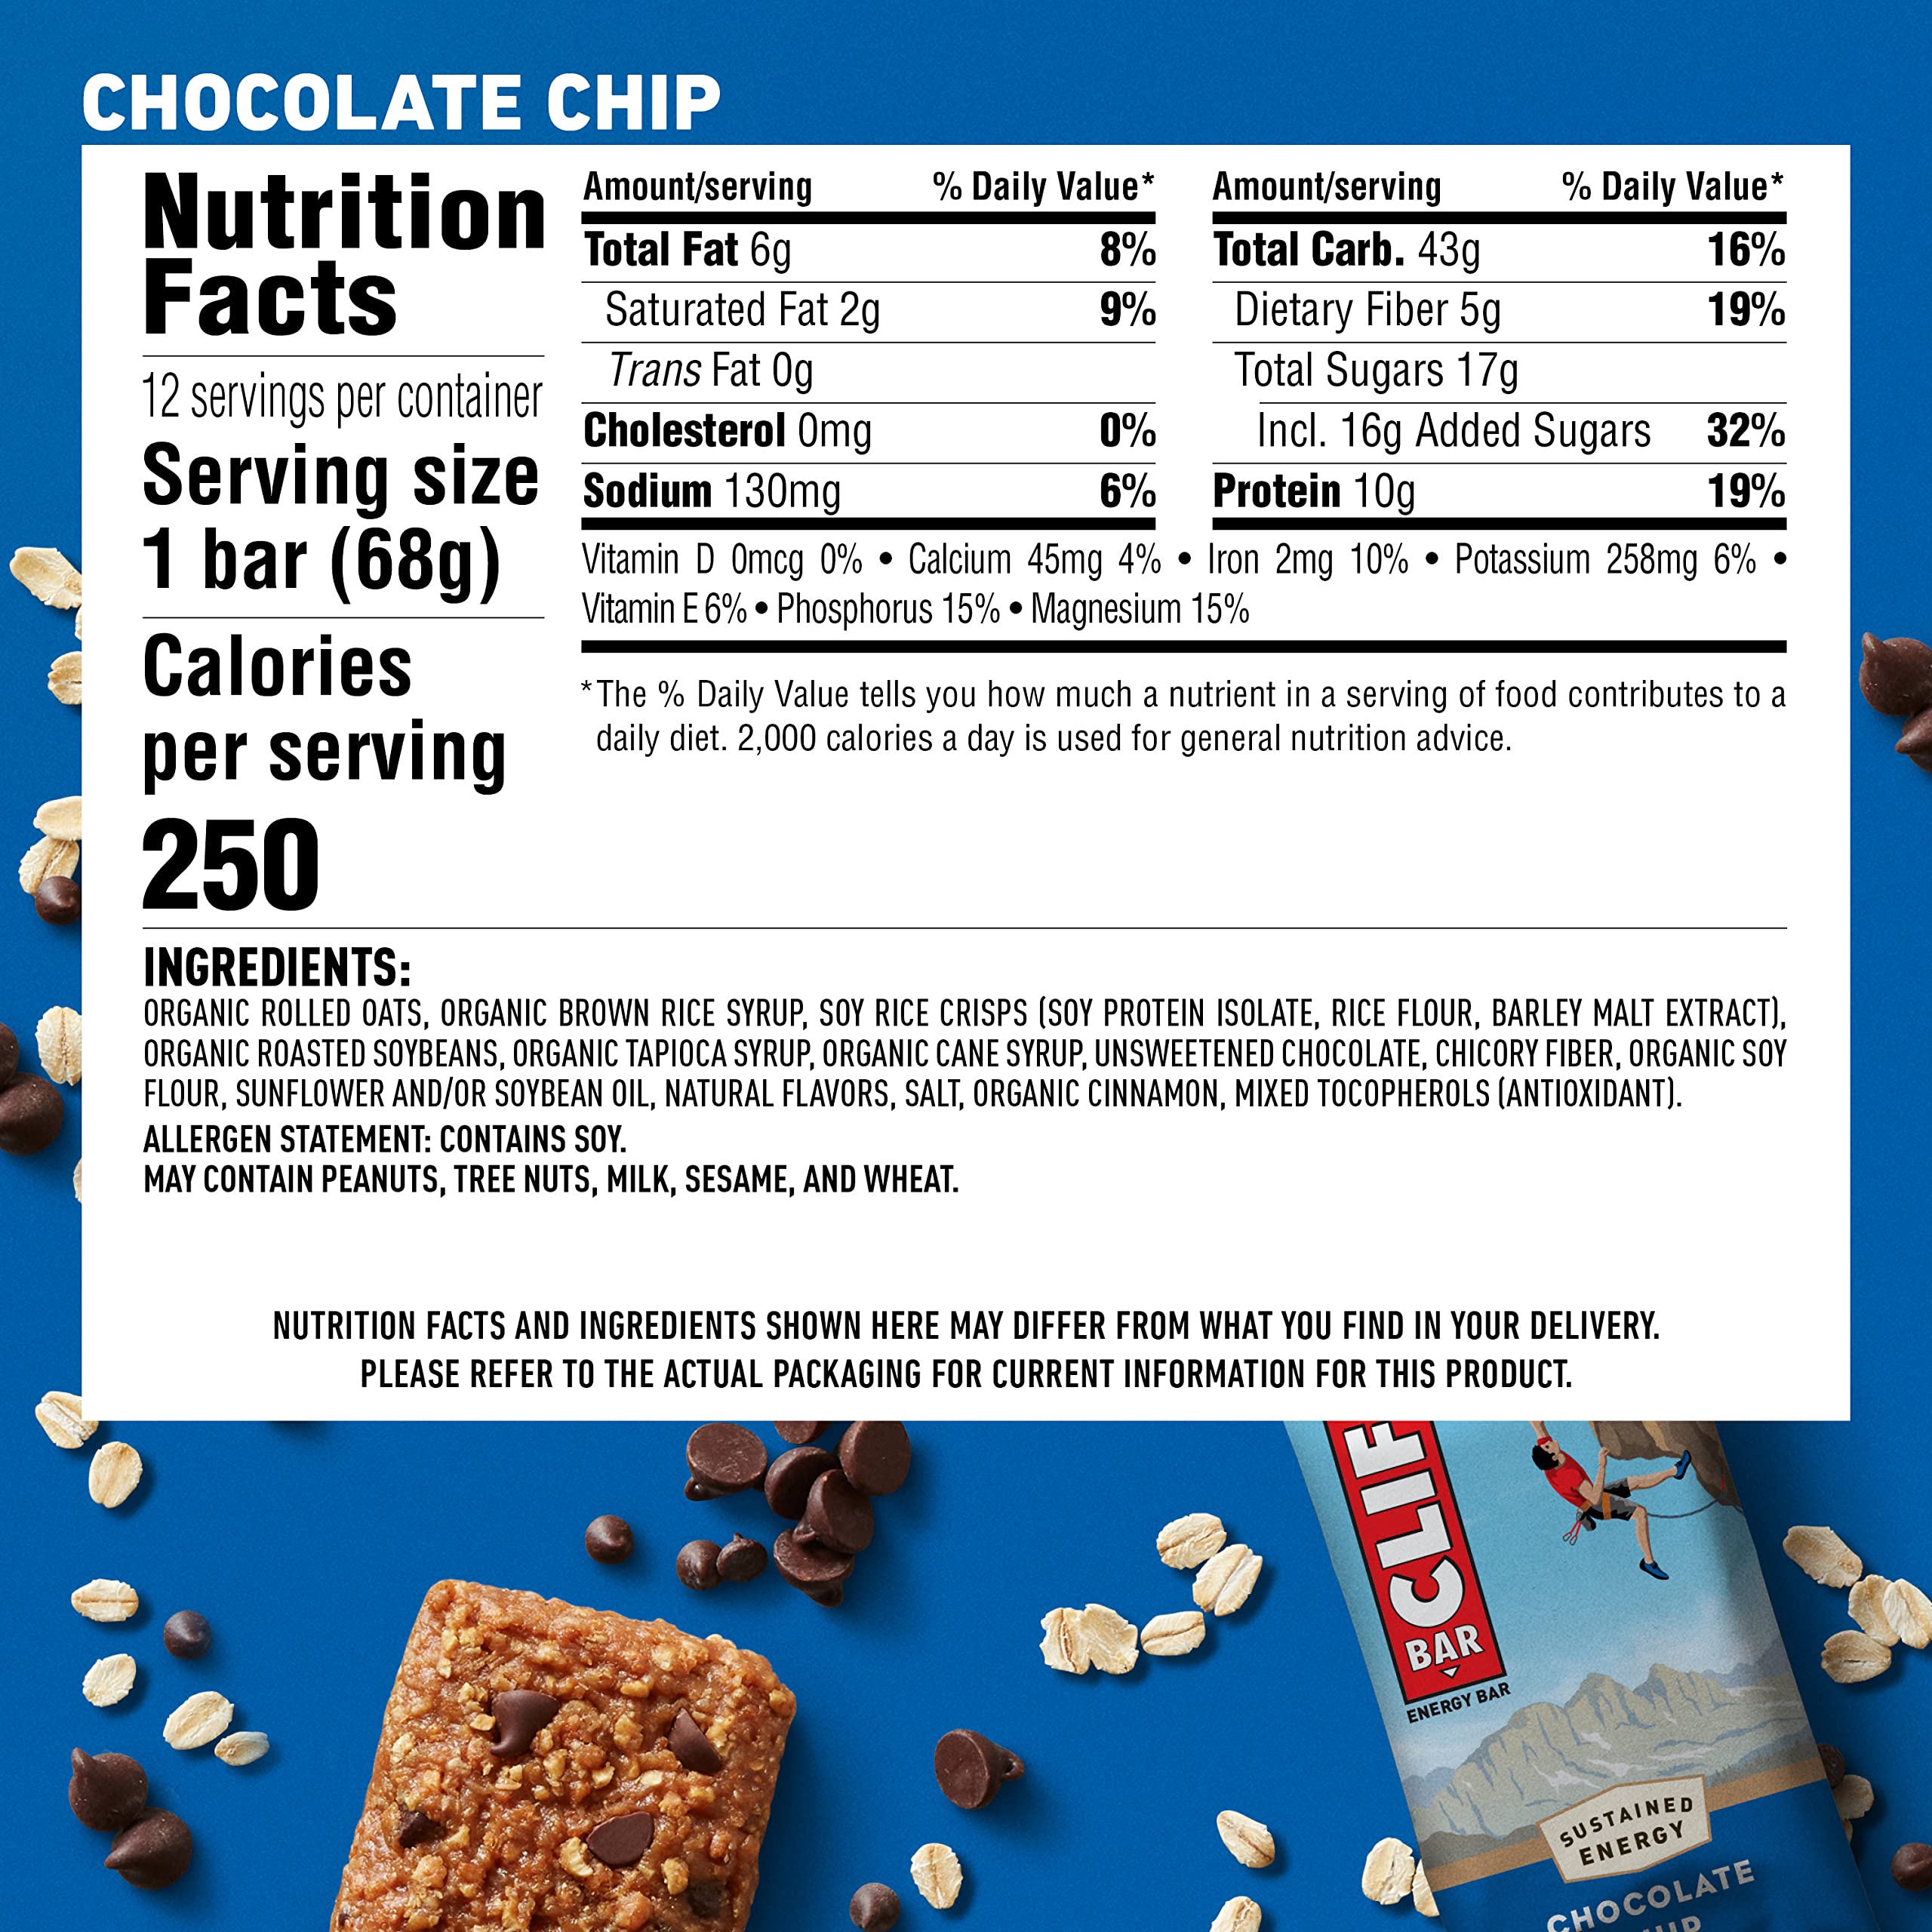 CLIF BARS - Energy Bars - Chocolate Chip - Made with Organic Oats - Plant Based Food - Vegetarian - Kosher, 2.4 Ounce (Pack of 12)